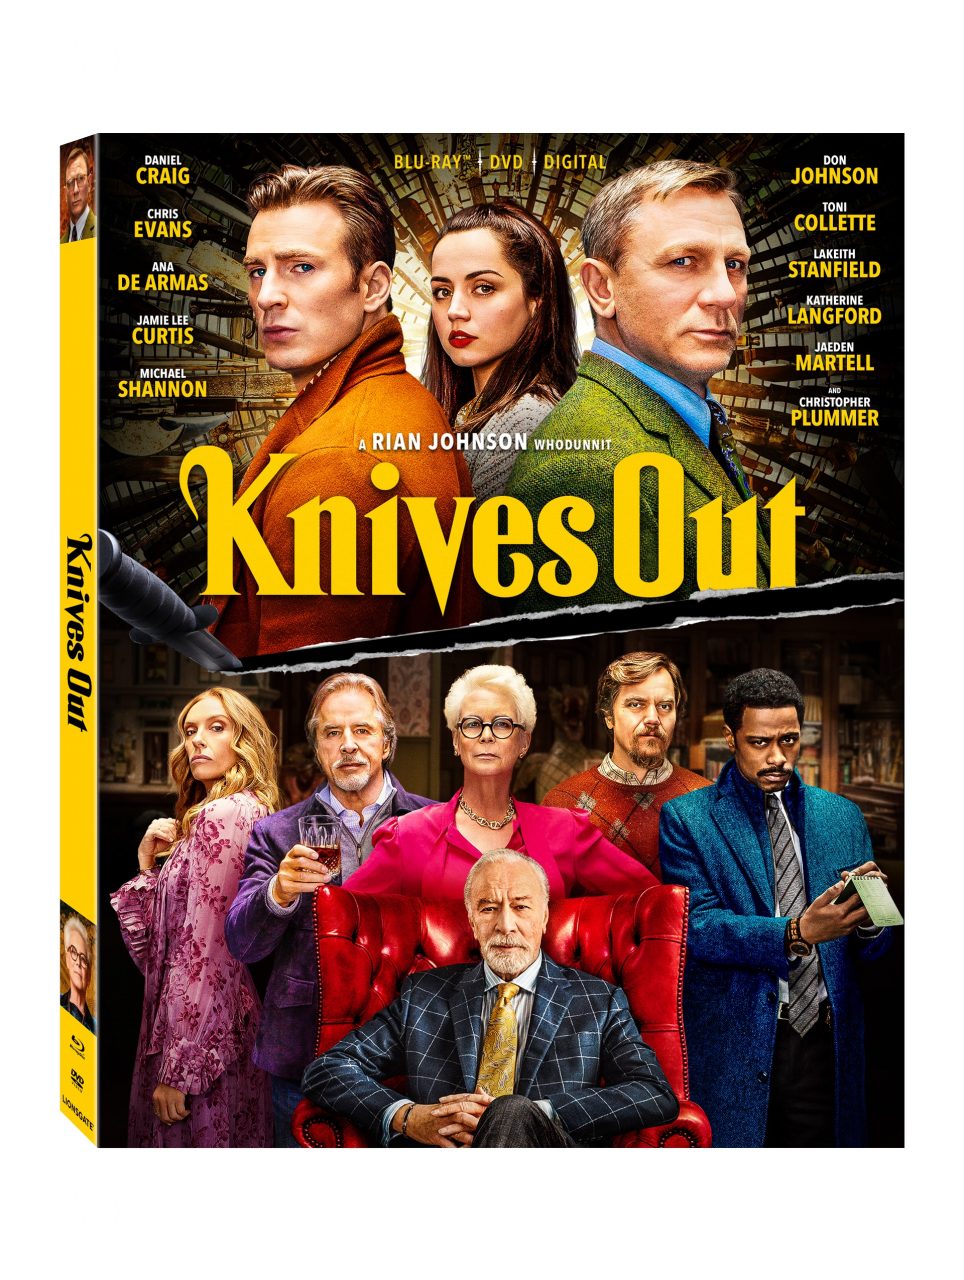 Knives Out Blu-Ray Combo Pack cover (Lionsgate Home Entertainment)